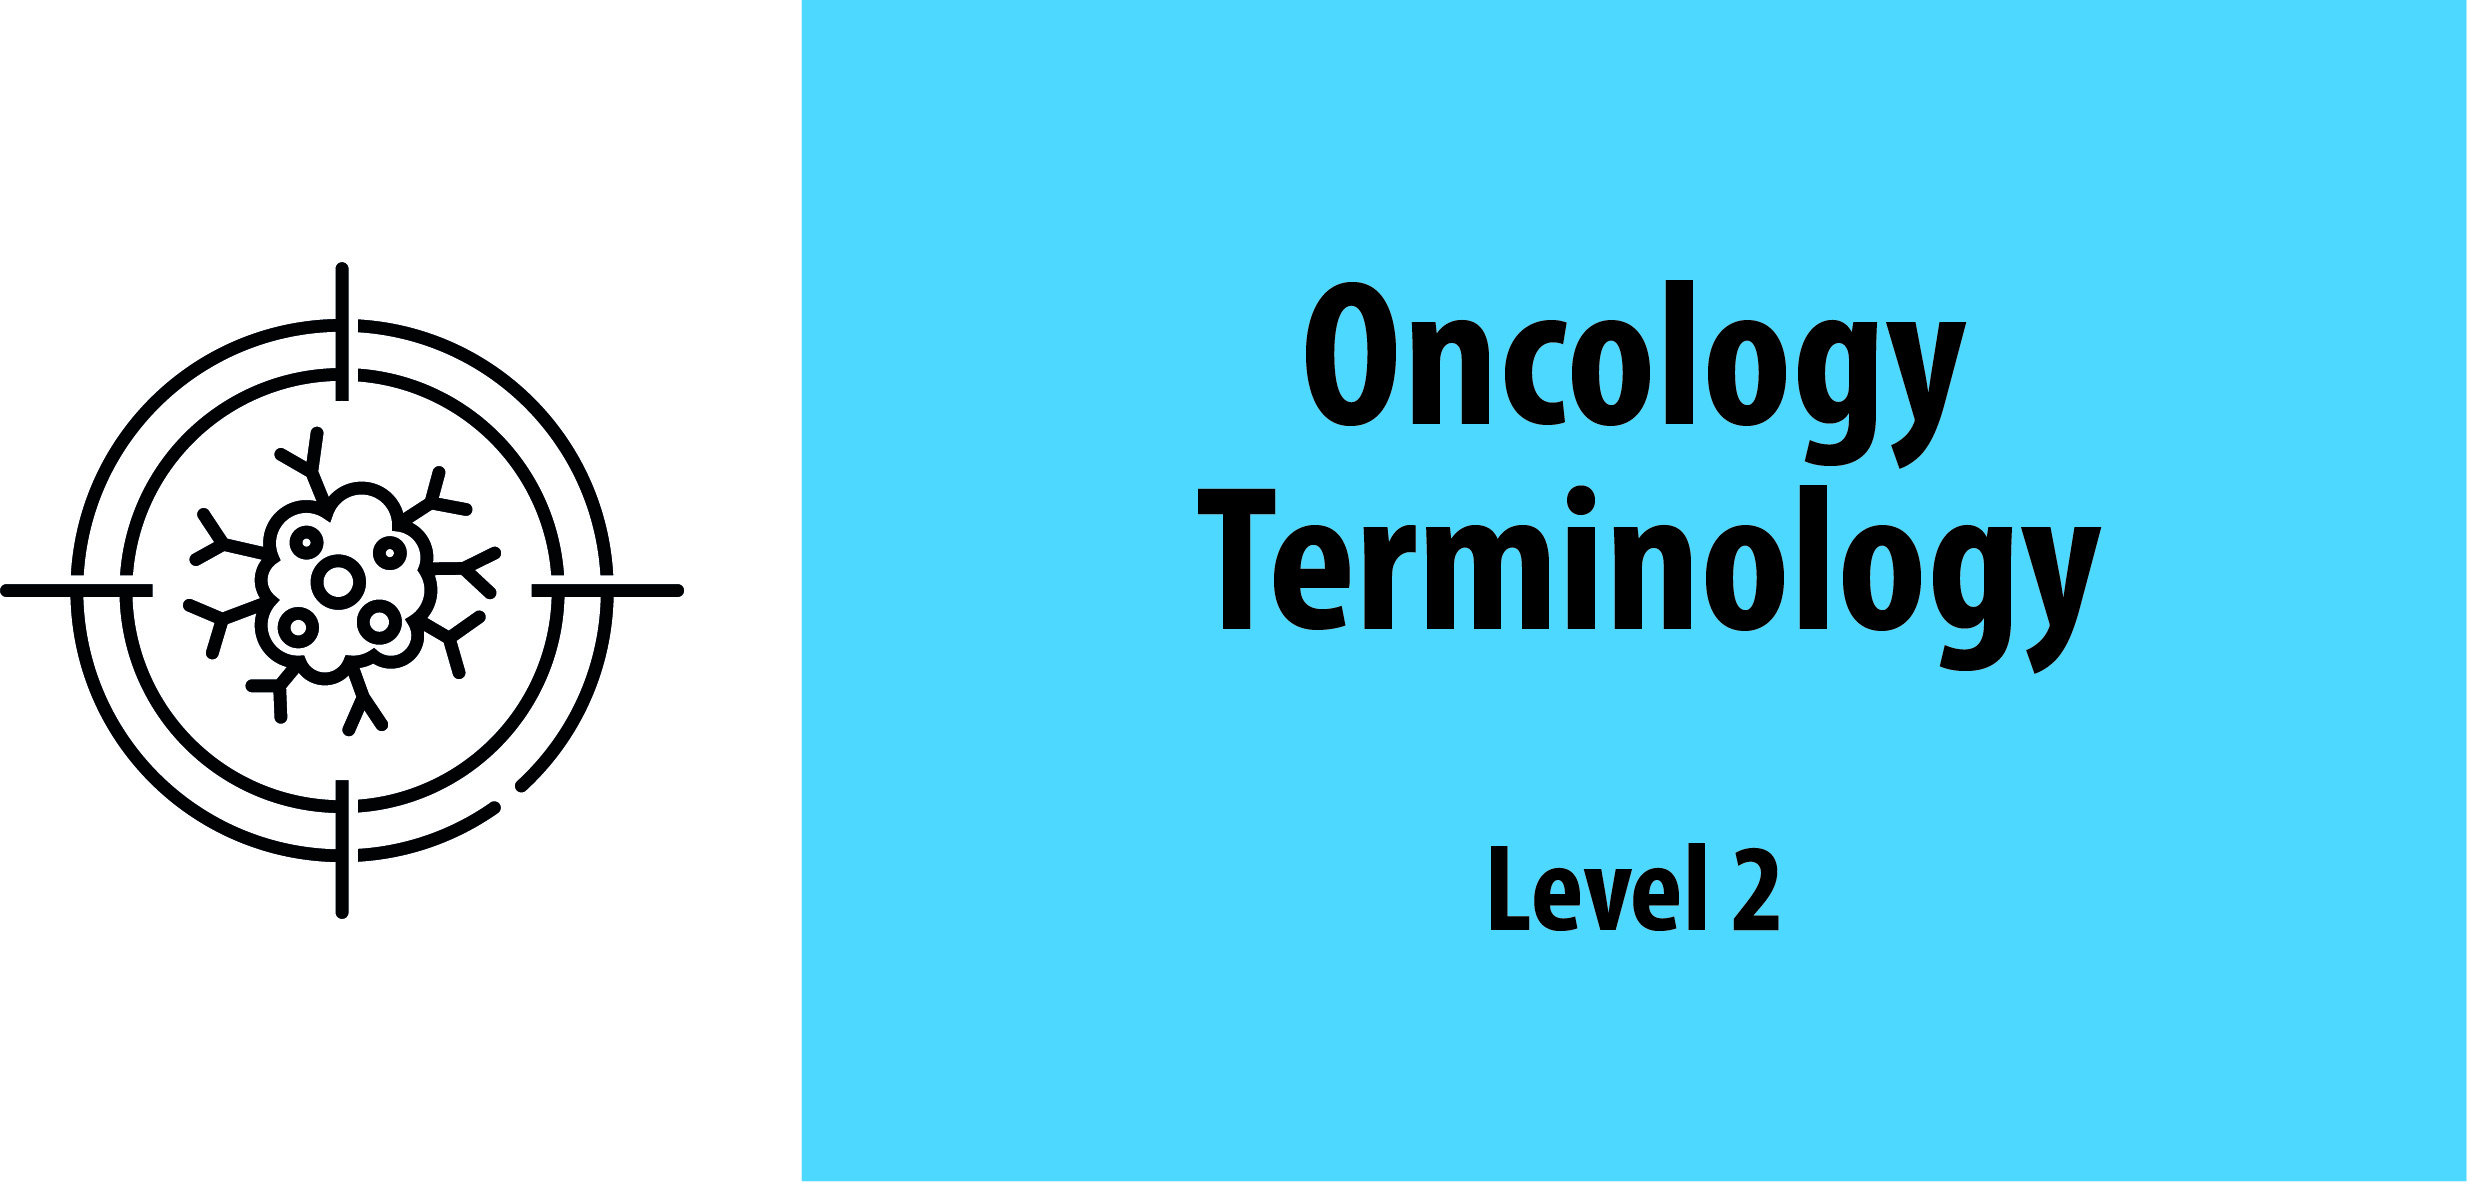 Oncology terminology L2